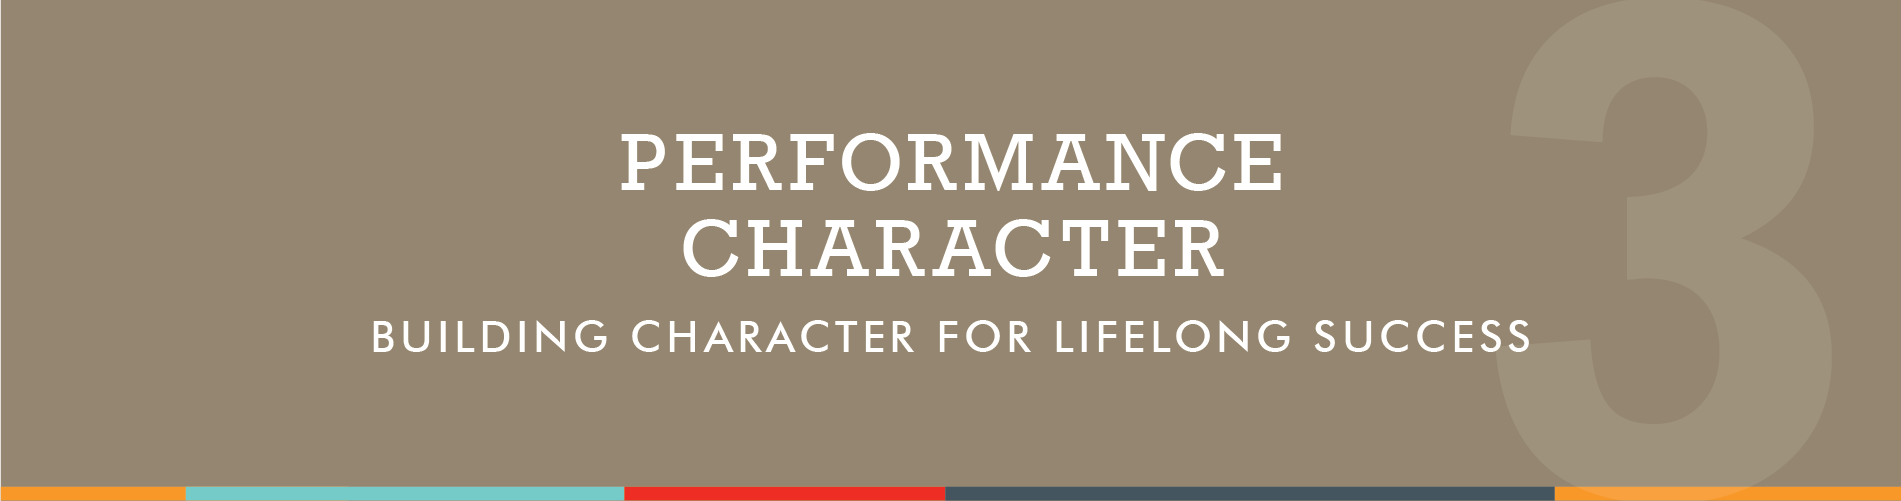 Performance Character: Building character for lifelong success